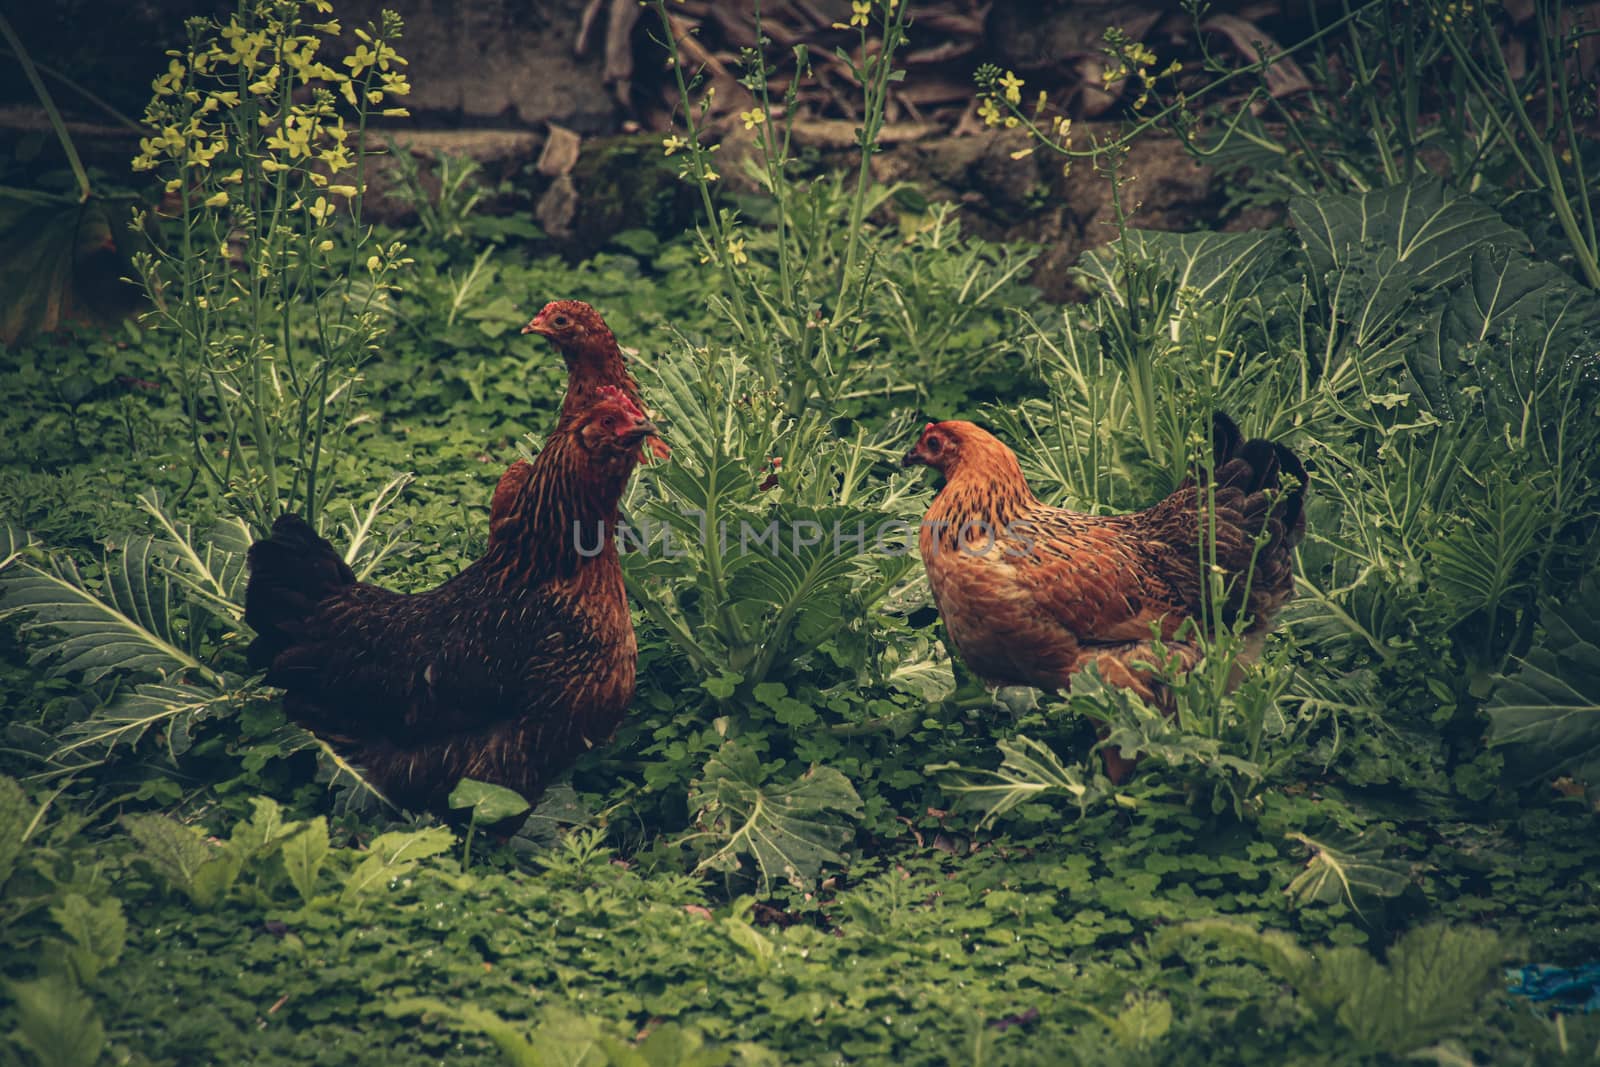 Free roaming native chickens in Ha giang, Vietnam that shows the village life, livelihood and culture